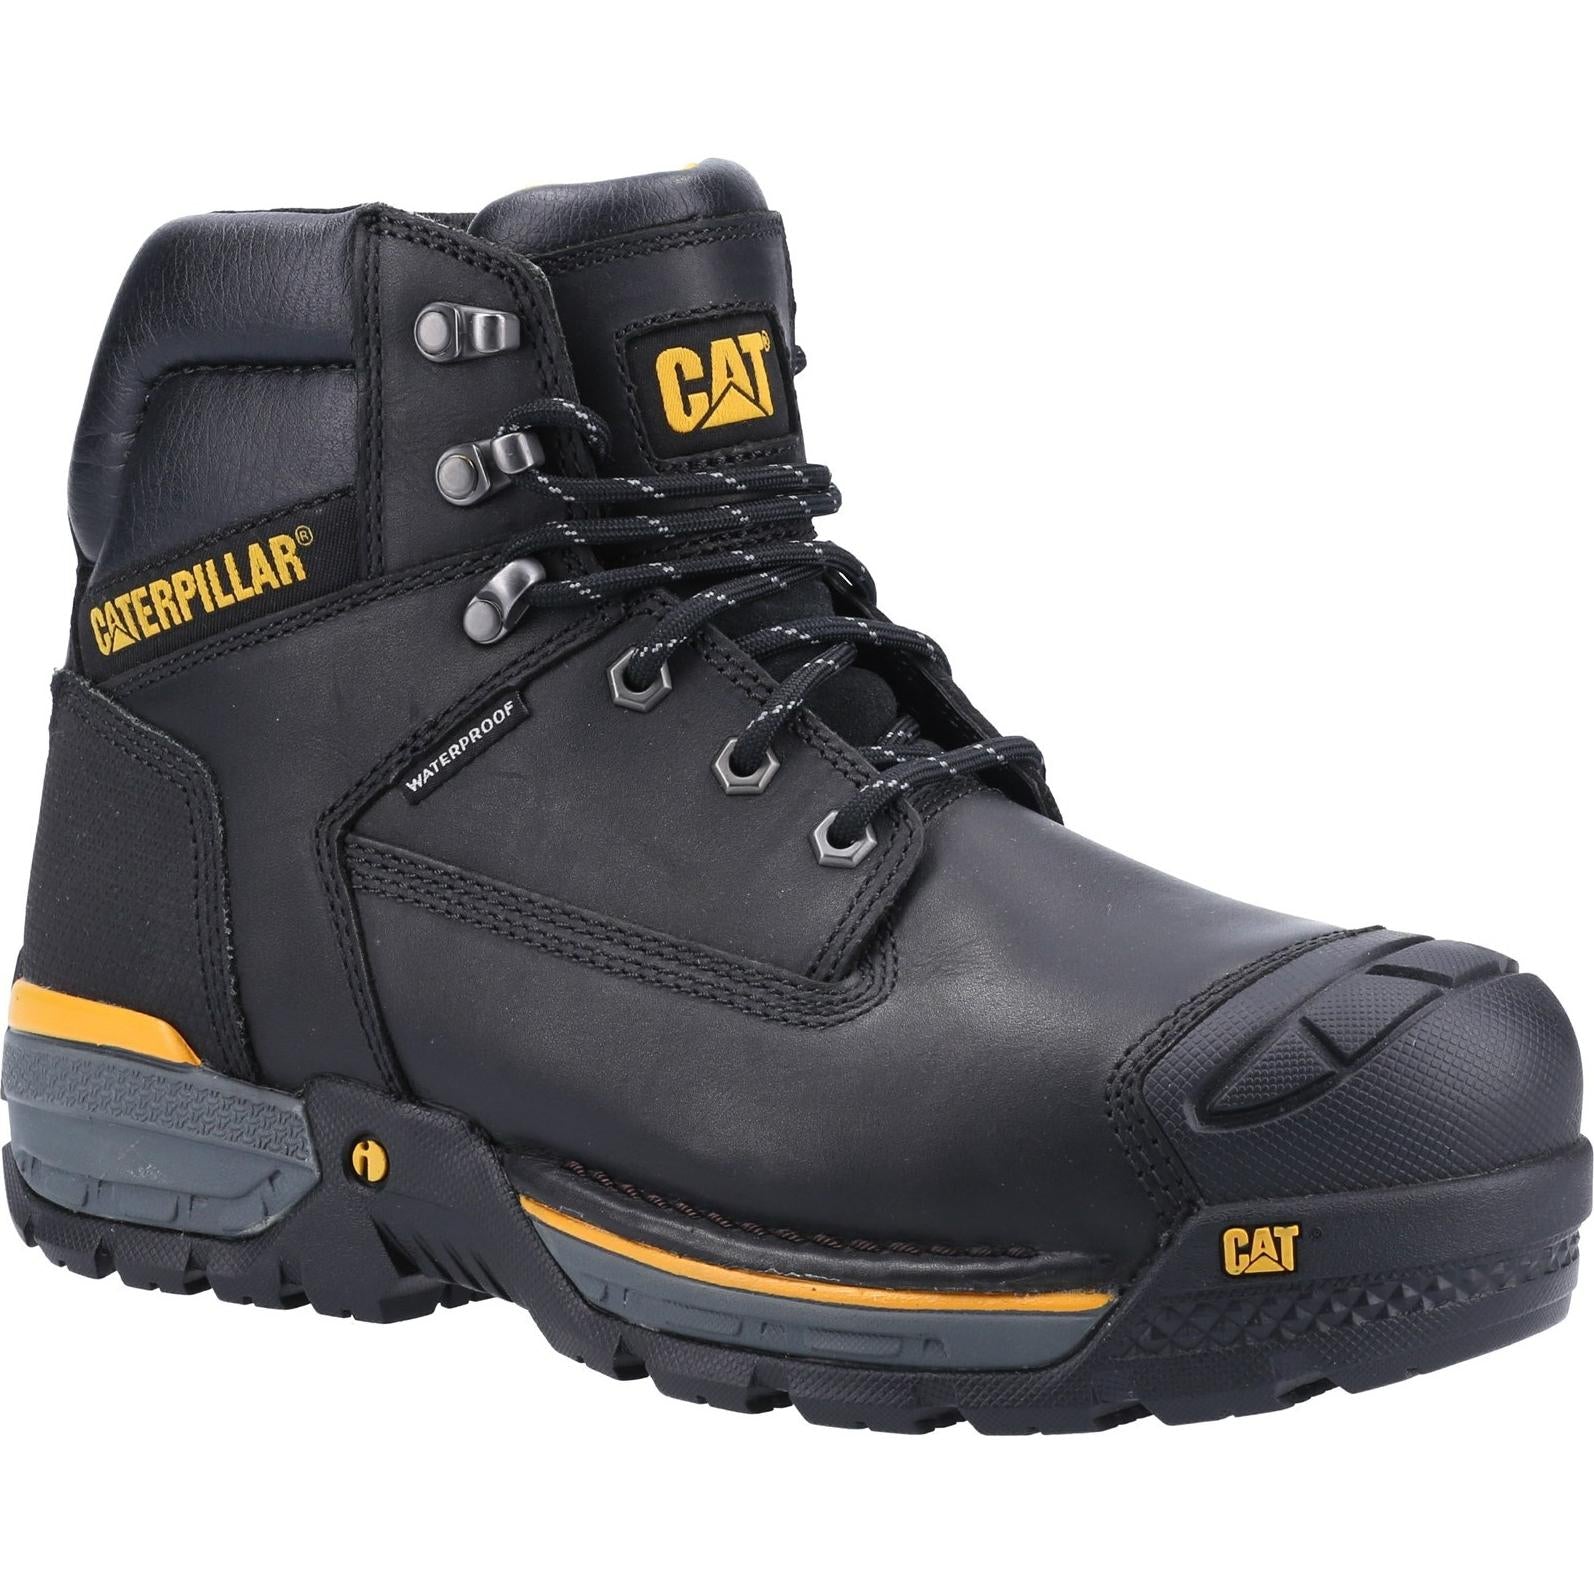 Caterpillar Excavator Lace Up Safety Hiker Boots